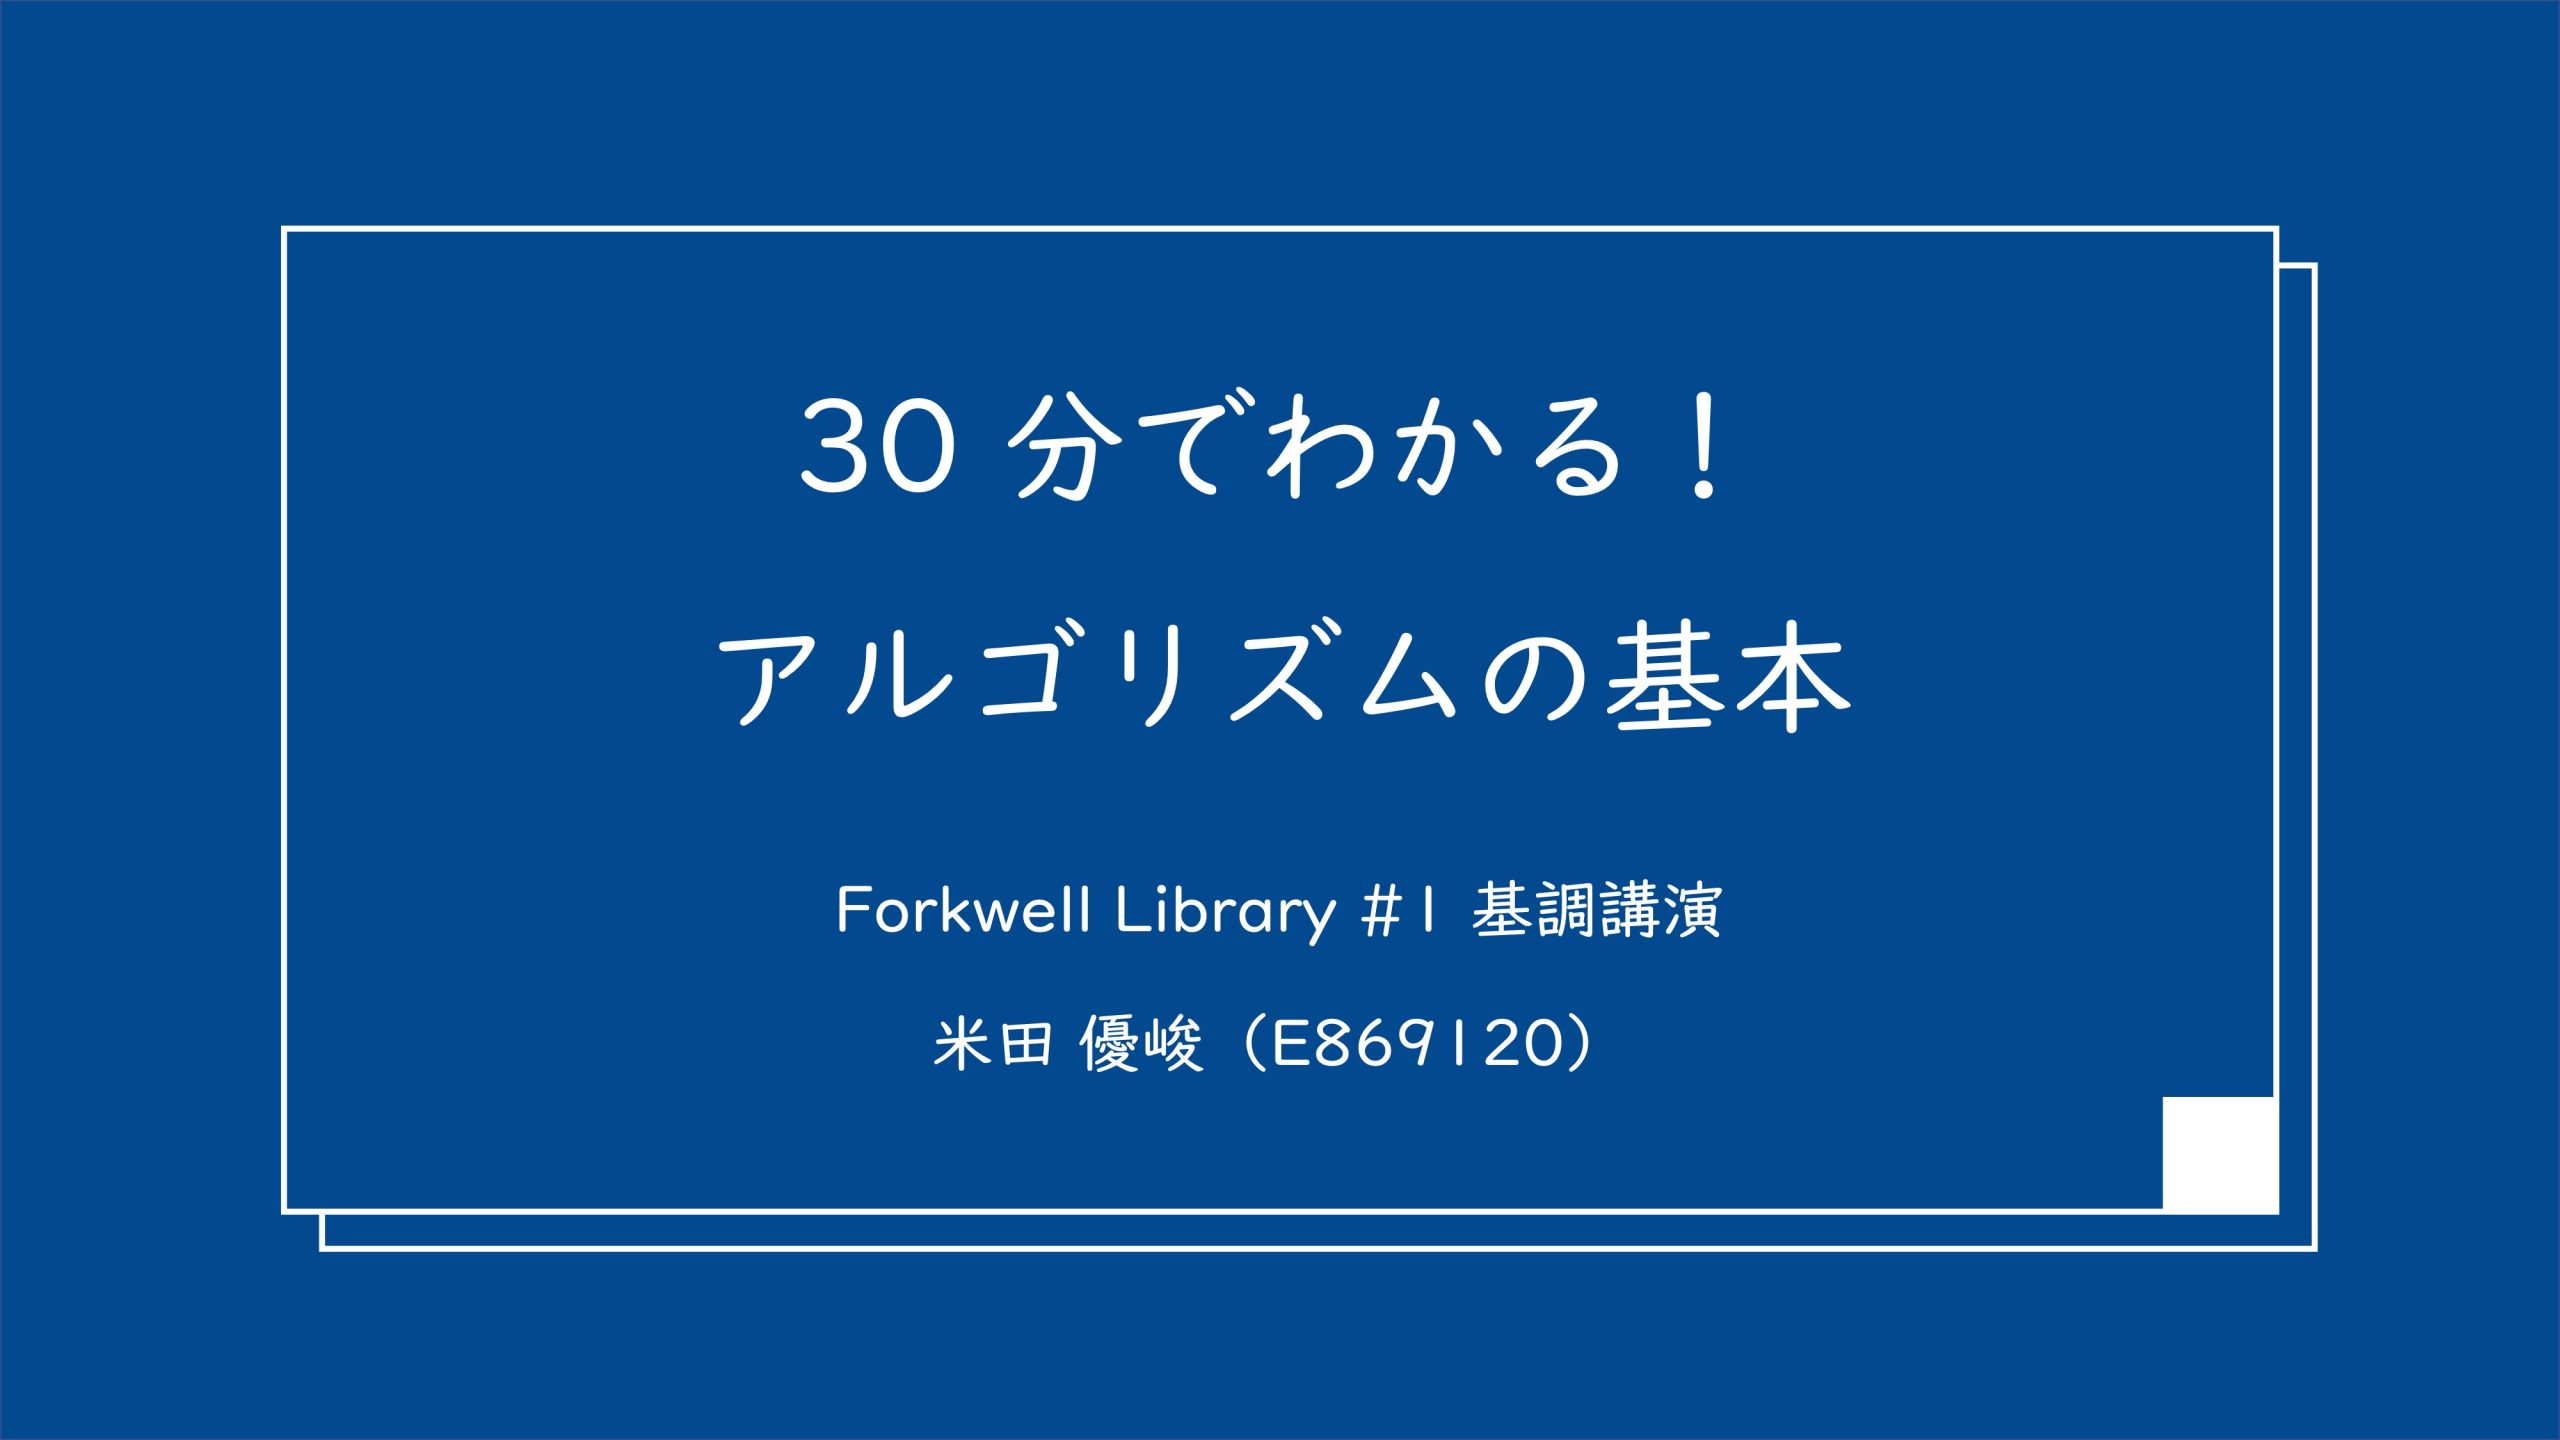 Forkwell Library #1 の画像